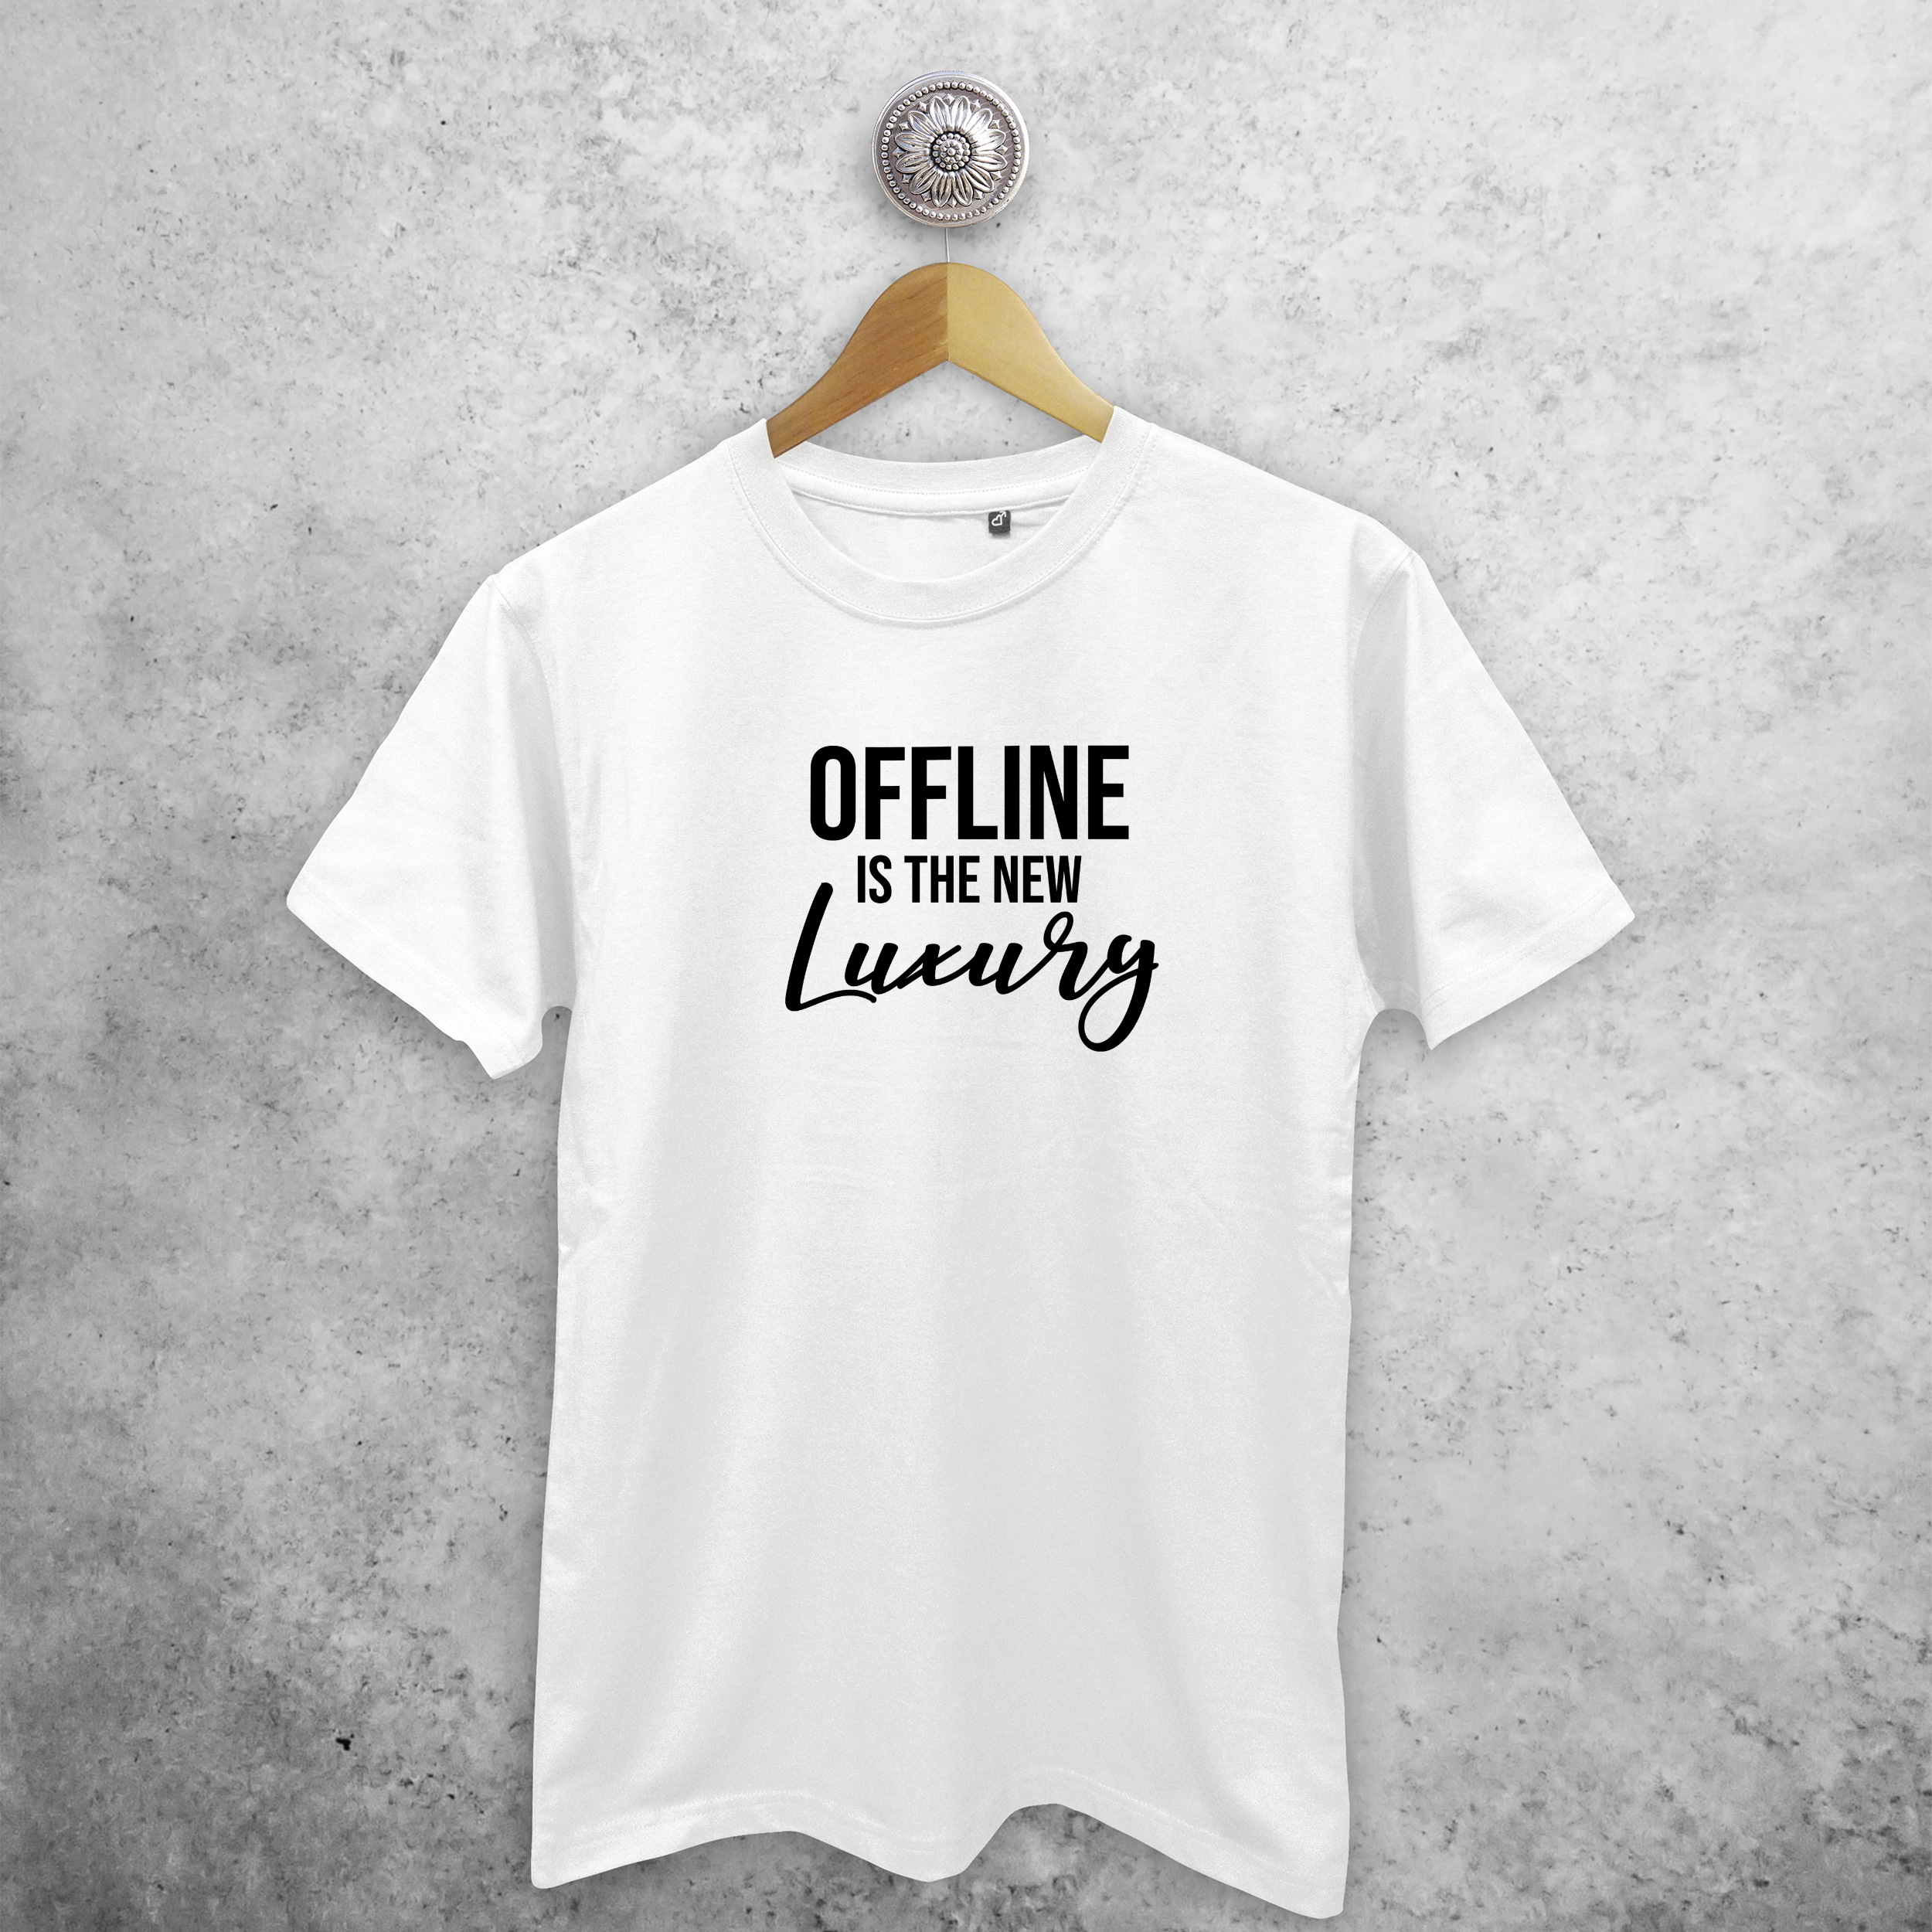 'Offline is the new luxury' adult shirt